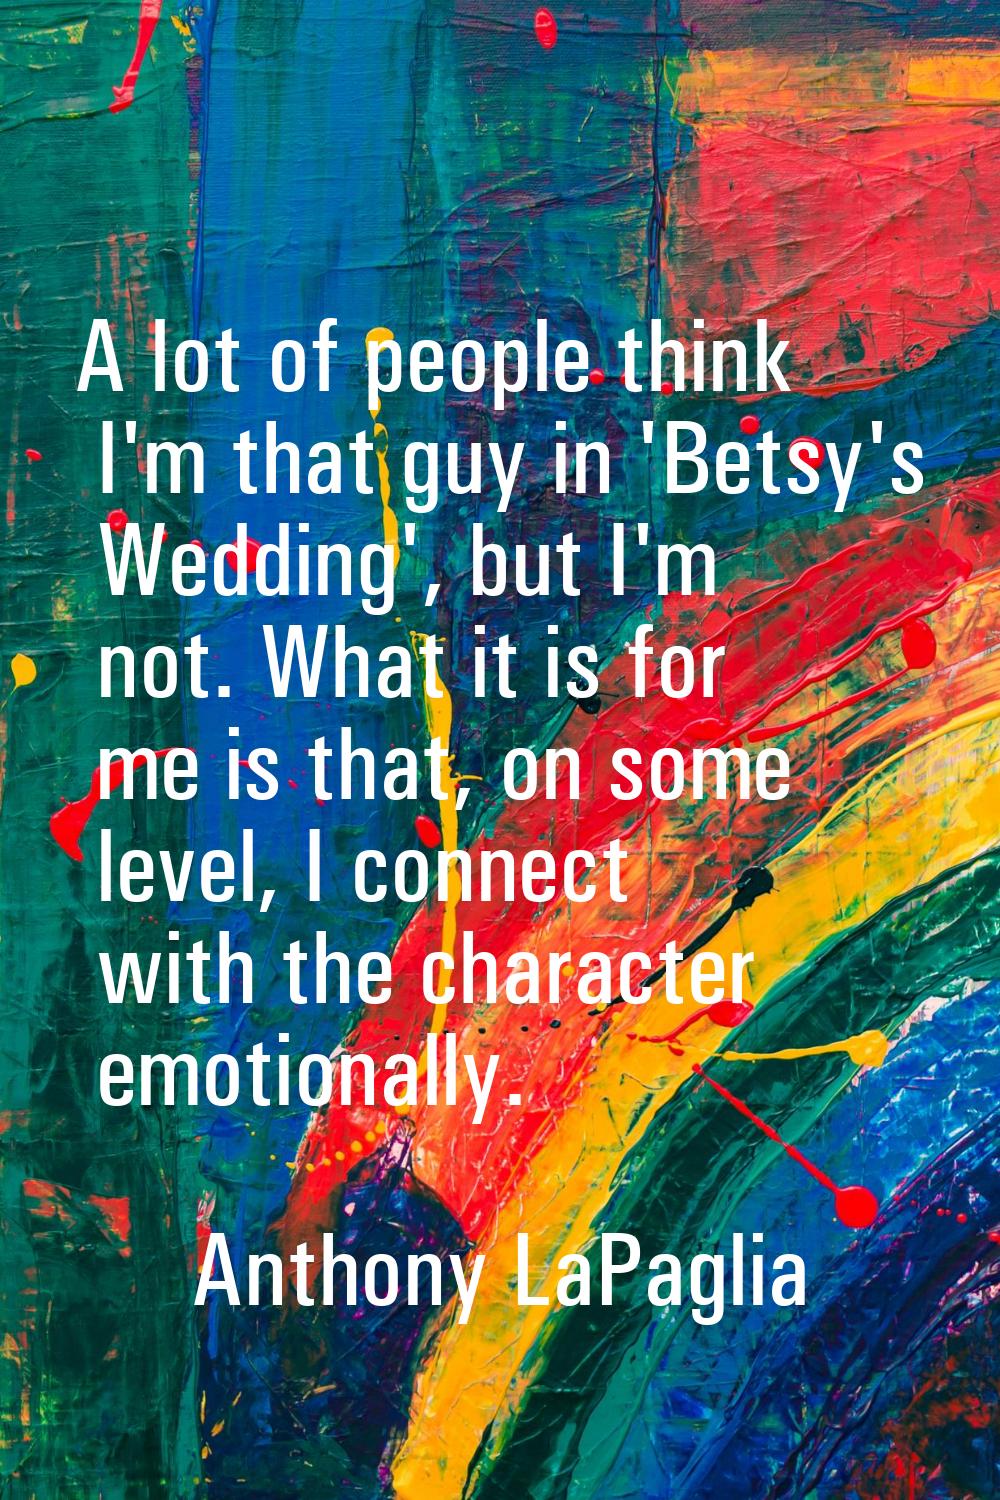 A lot of people think I'm that guy in 'Betsy's Wedding', but I'm not. What it is for me is that, on